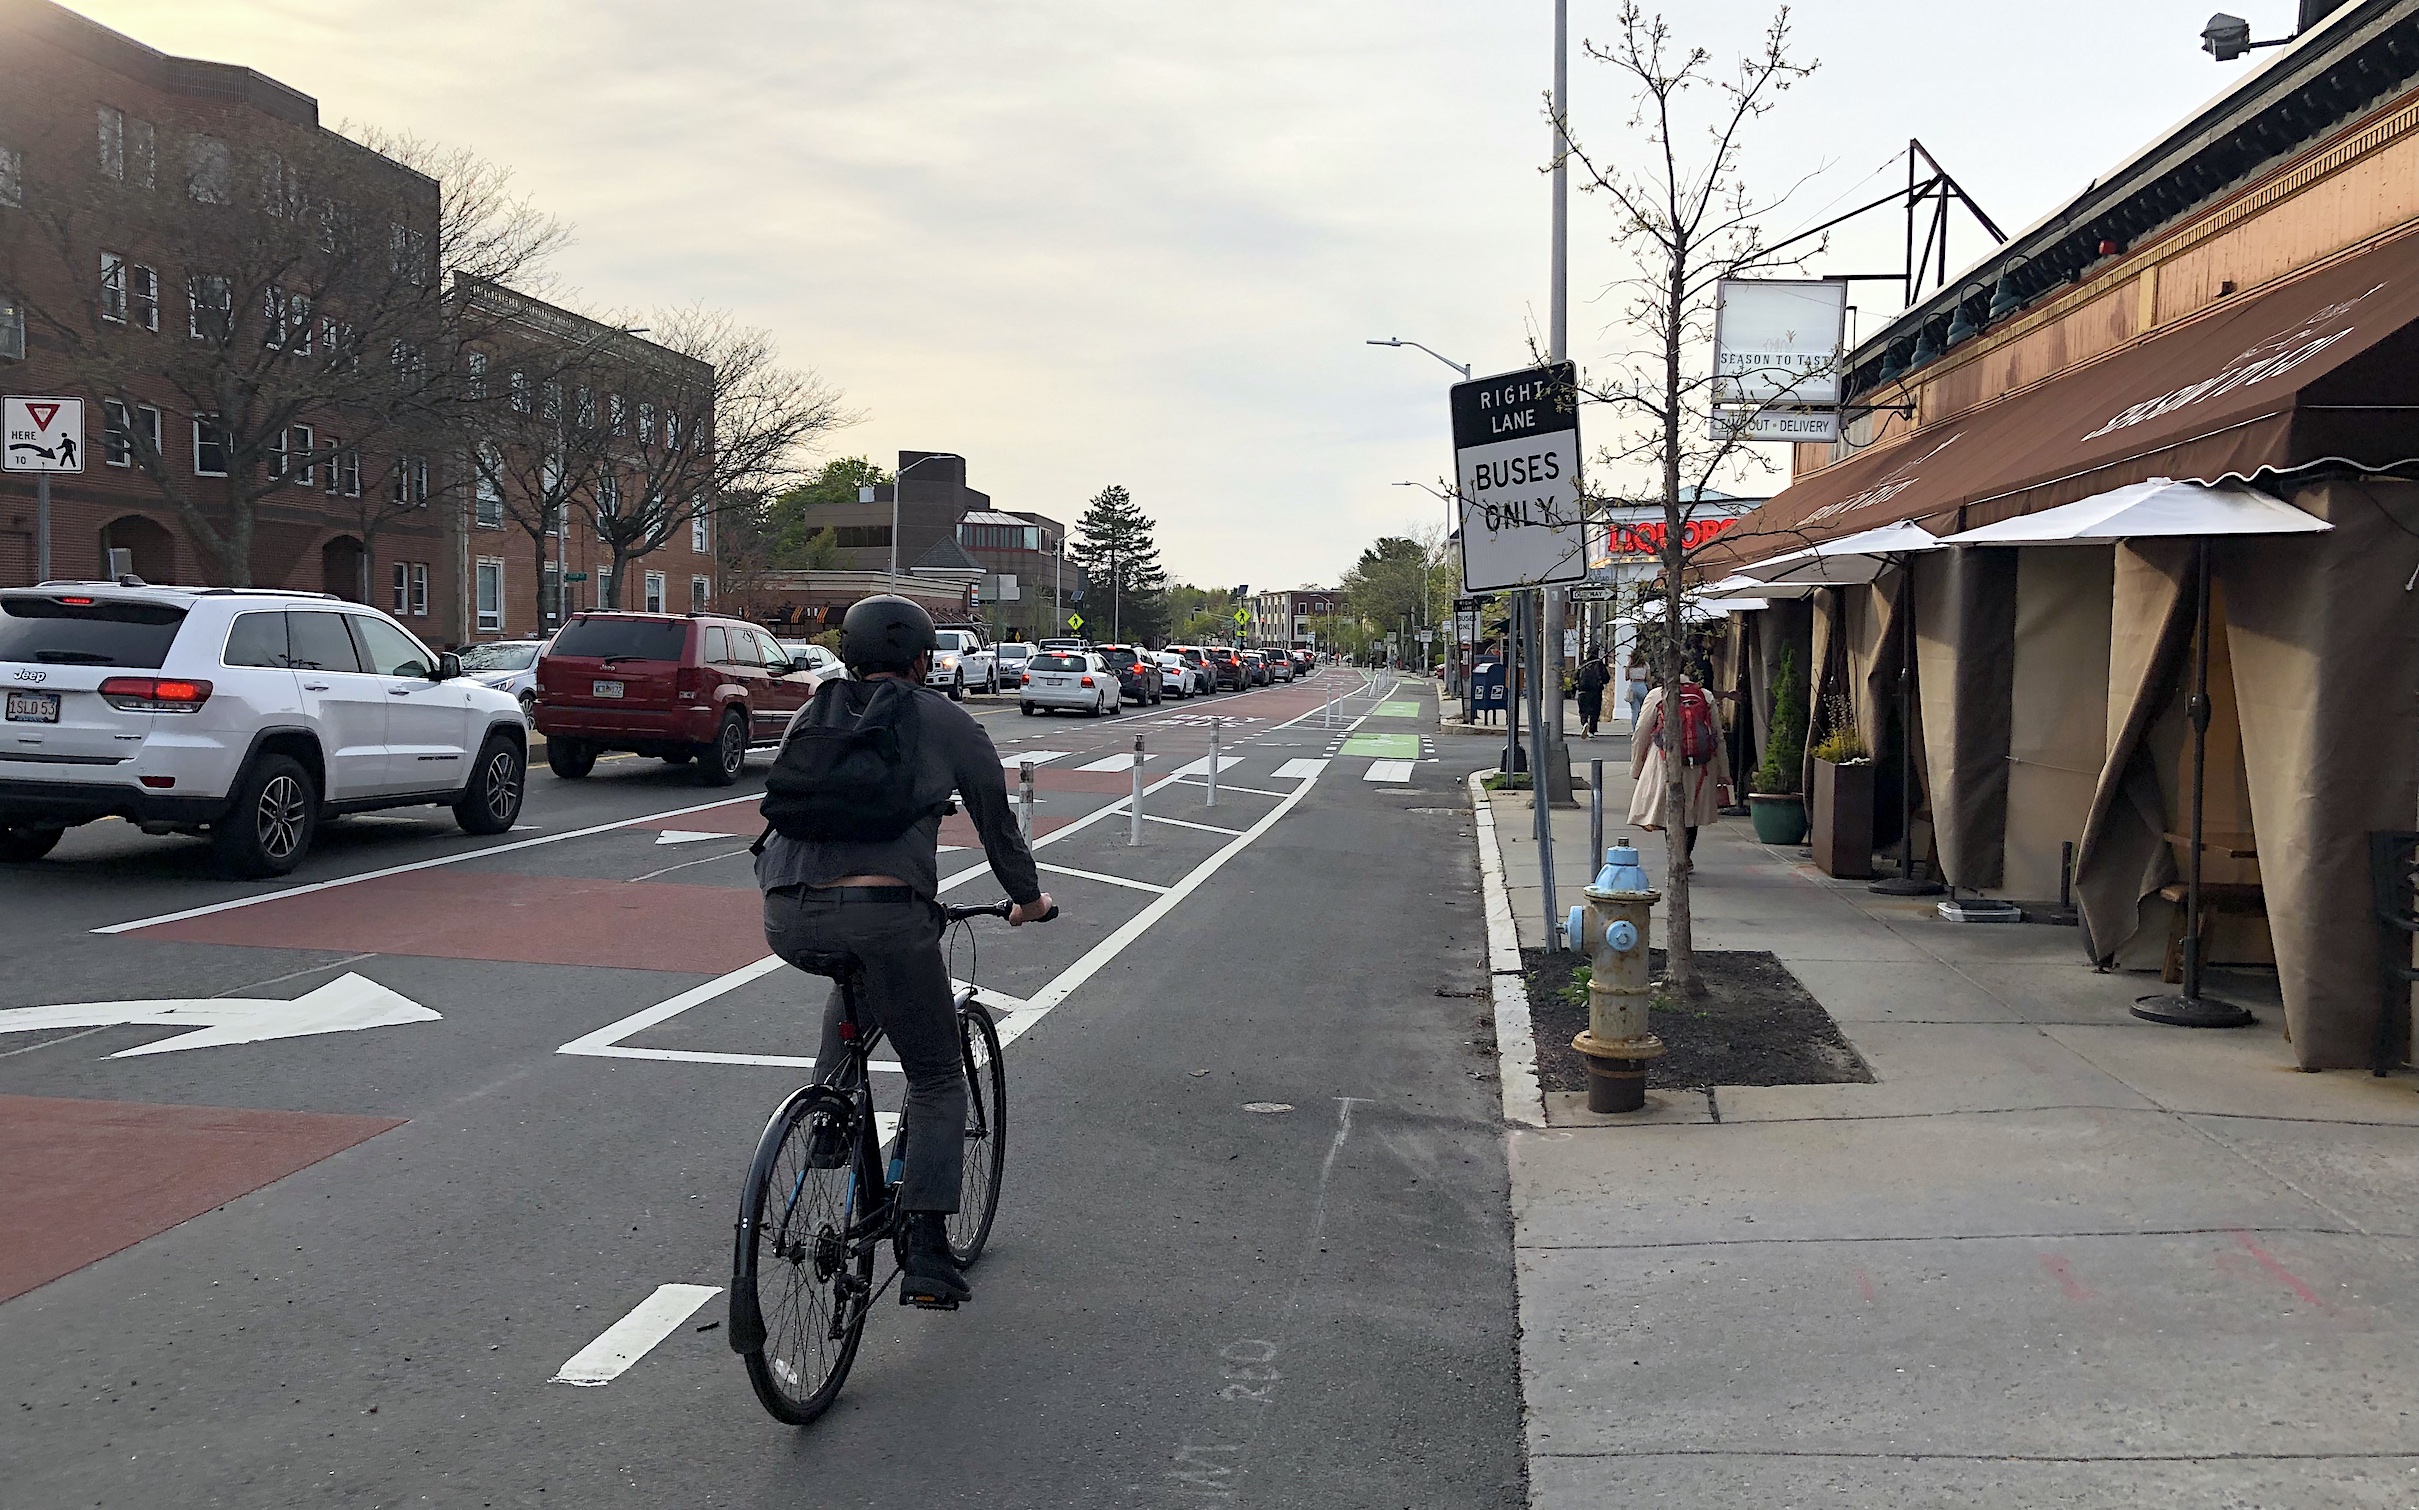 A bike rider rides along a flexpost-protected bike lane next to a sidewalk cafe on one side and a line of cars waiting in traffic on the other side of the bus lane, on the left edge of the photo.